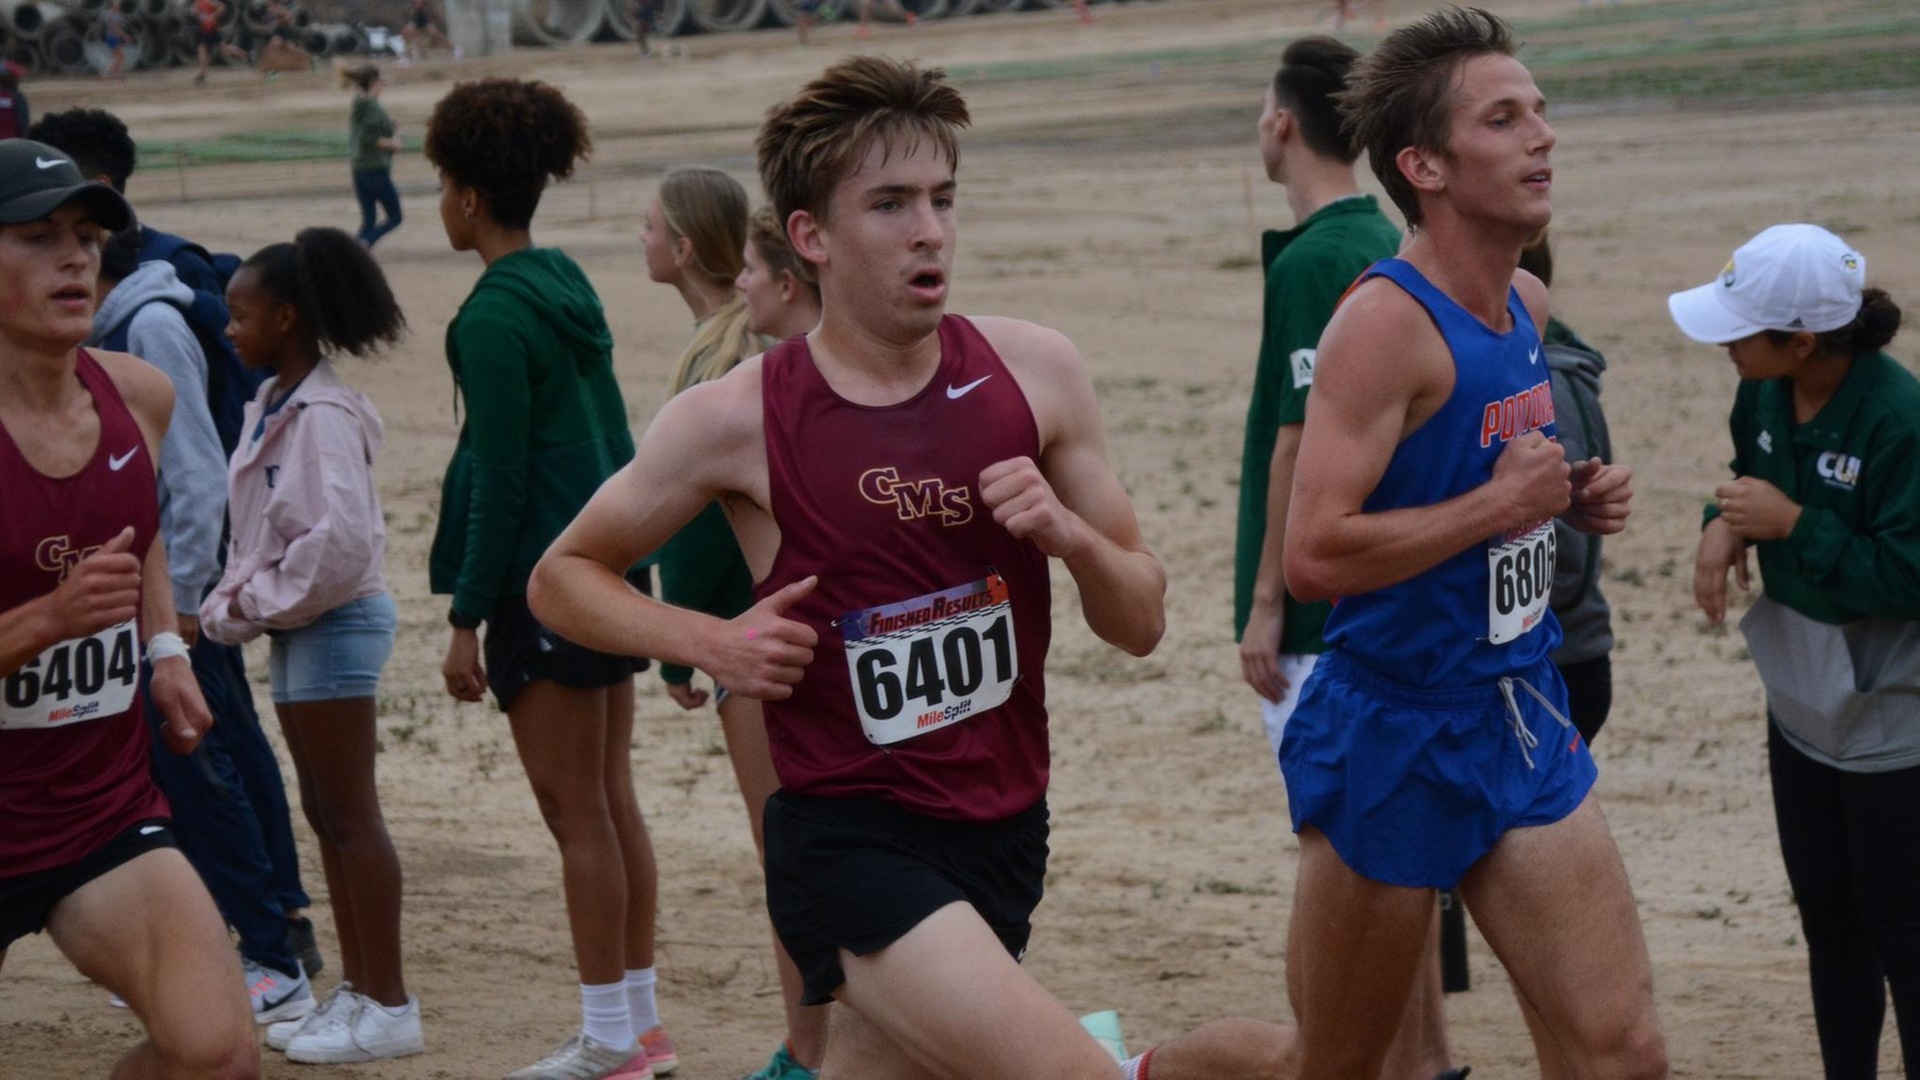 Charles Albach broke his PR by 42 seconds to move into the top 10 in CMS history